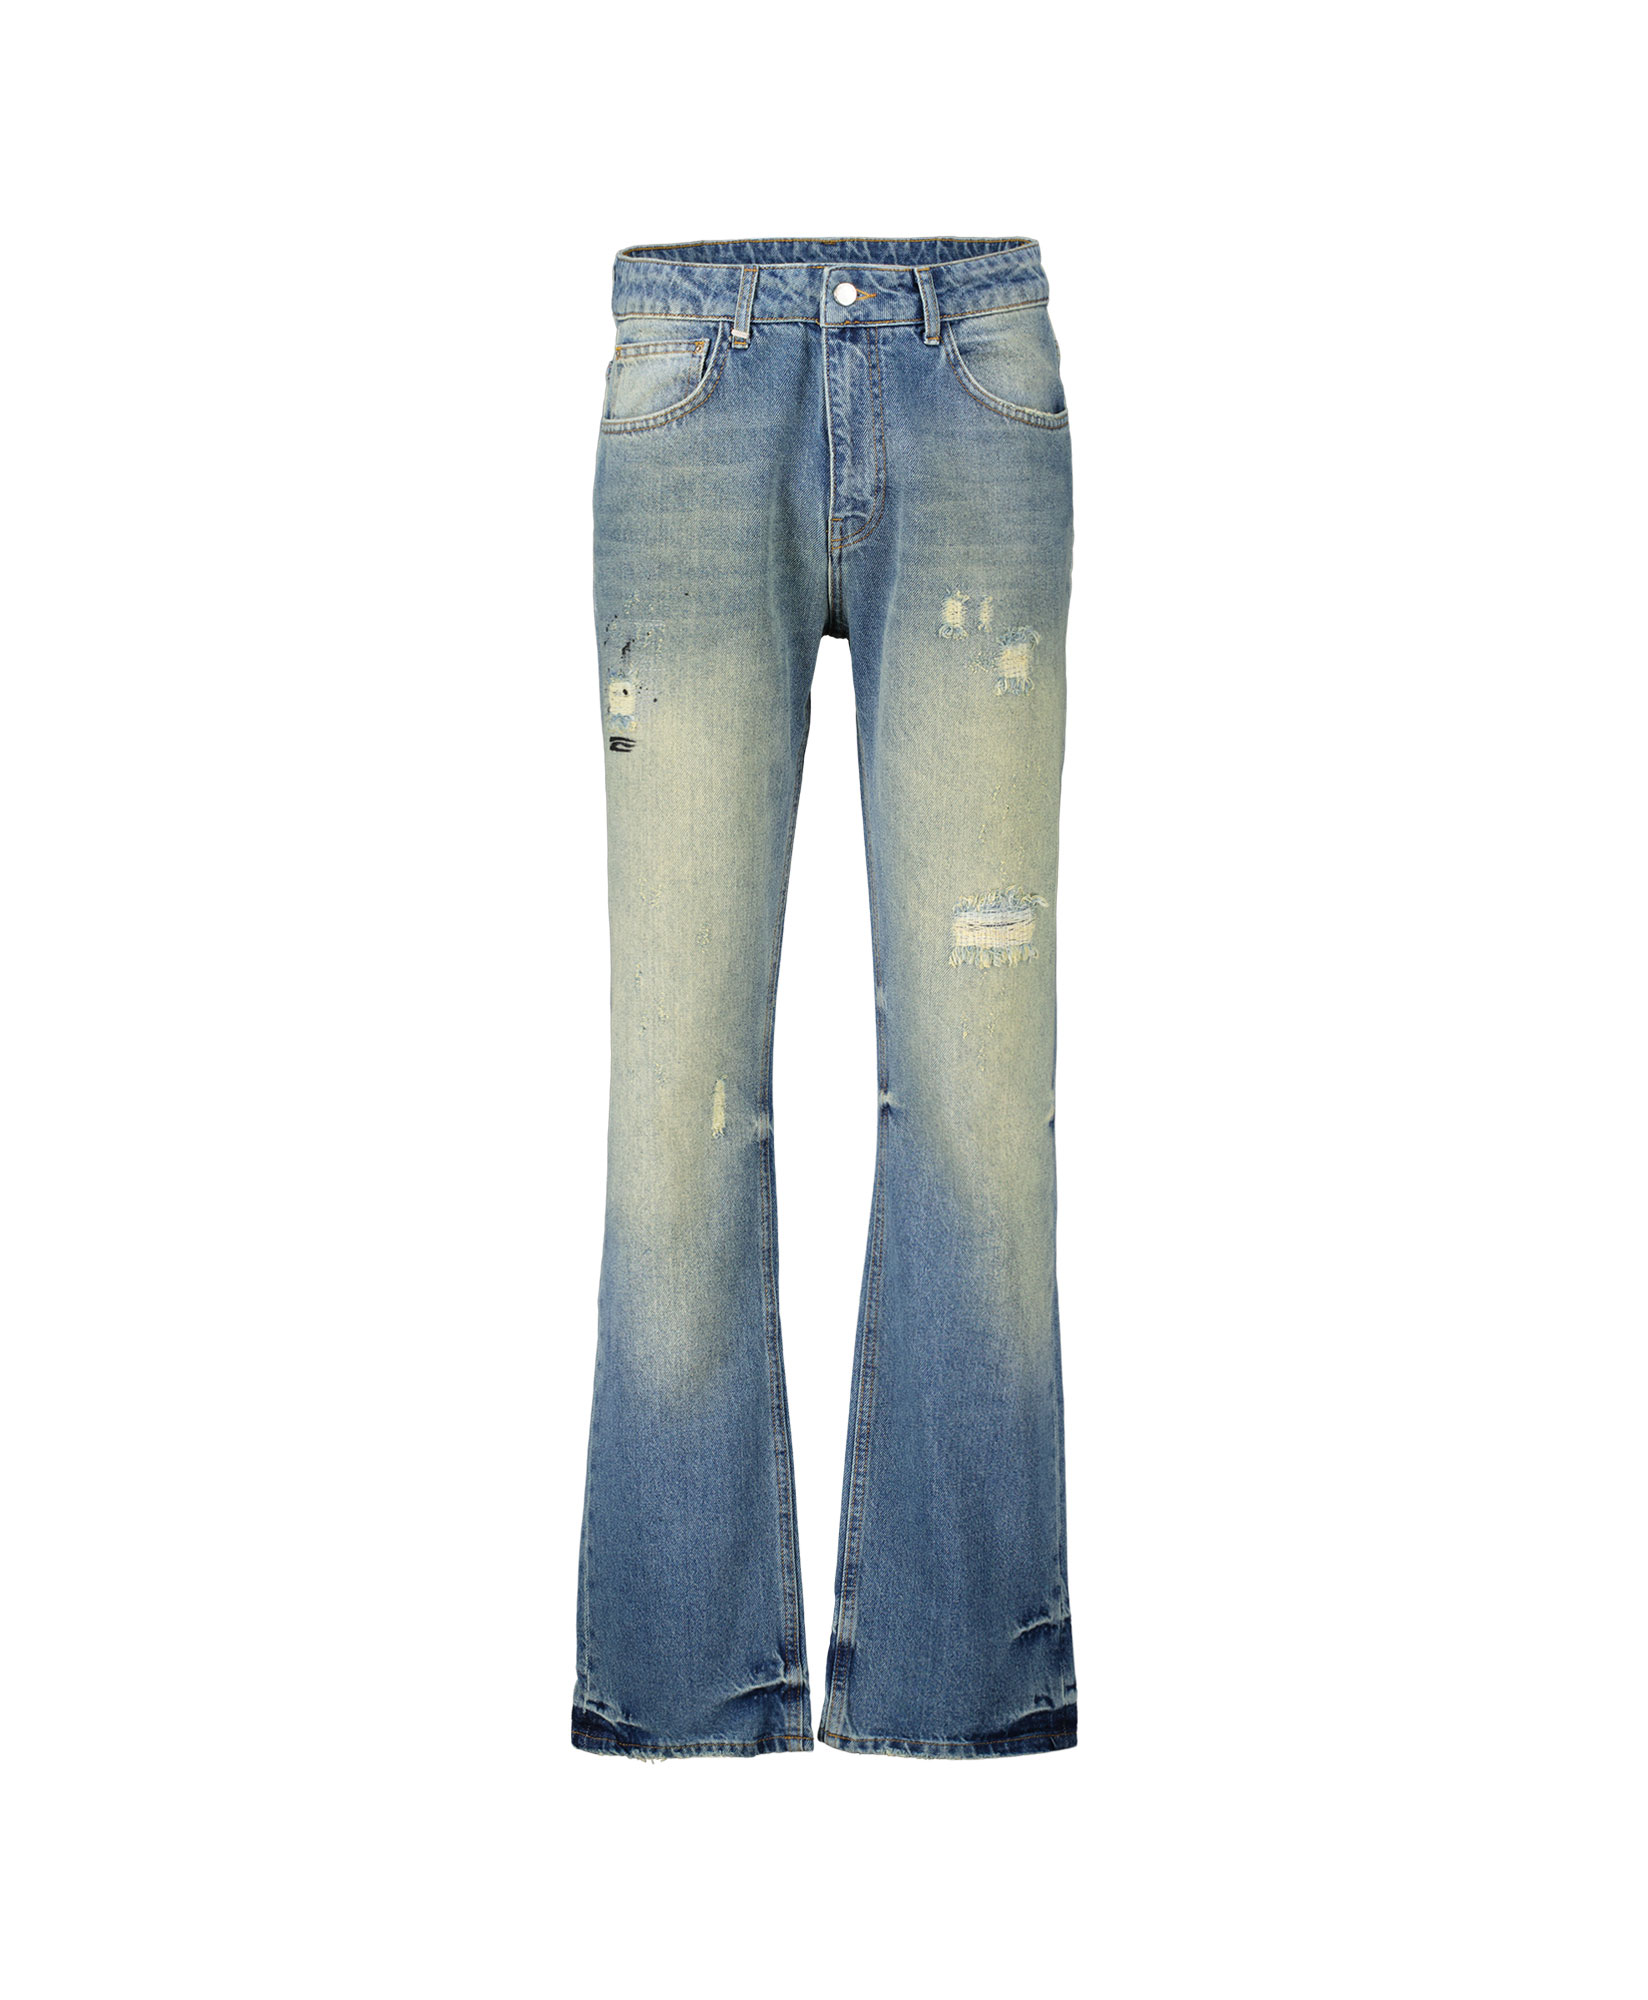 Flaneur Homme Jeans Distressed Straight Jeans Licht Blauw